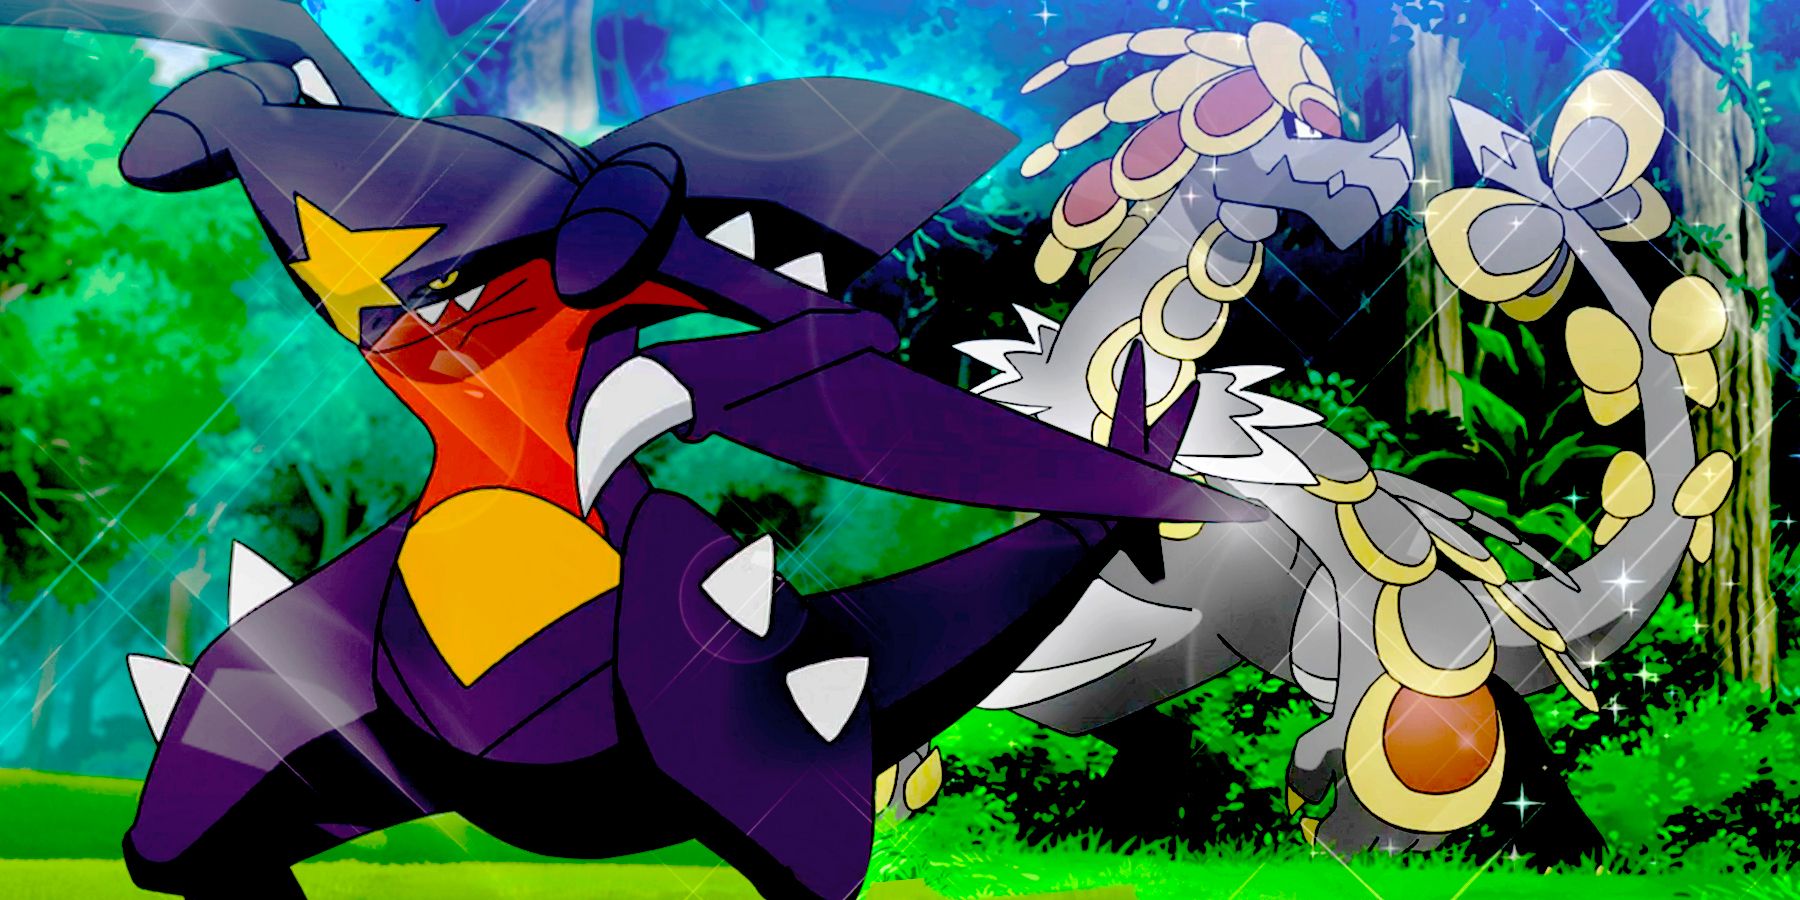 Ranking EVERY Mega Evolution Competitively! 